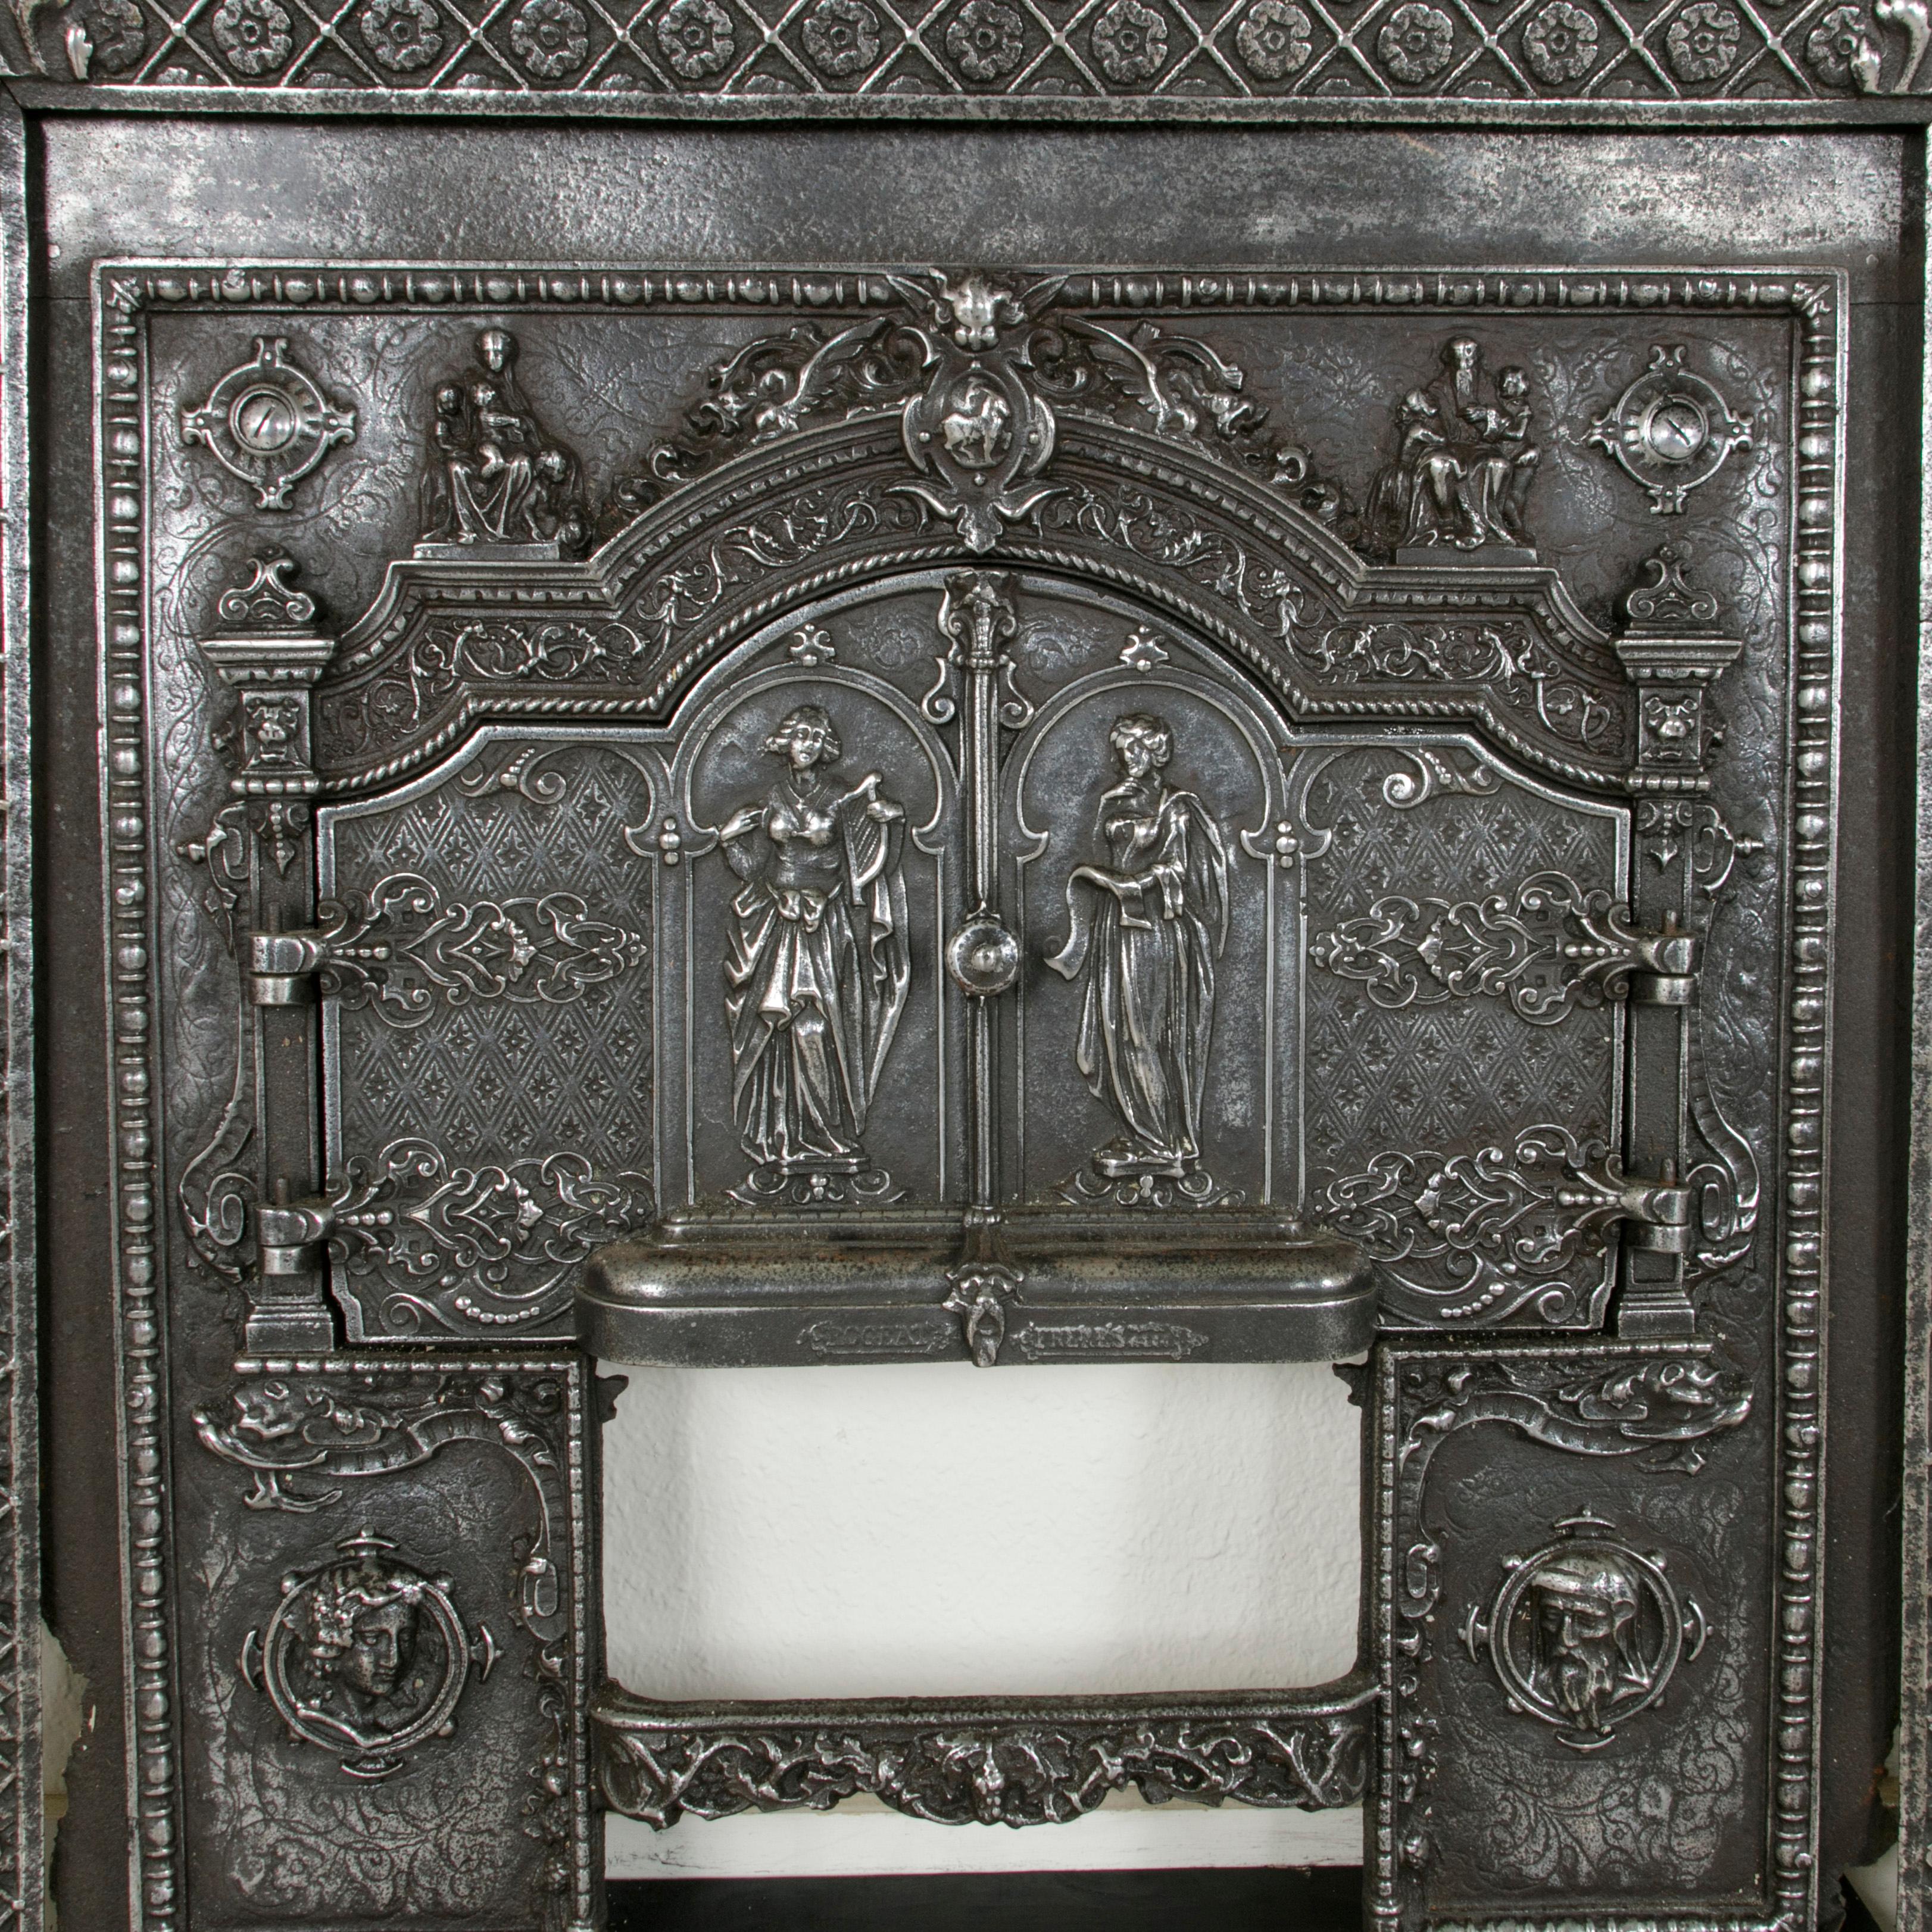 This impressive late 19th century French cast iron fireplace surround insert features two double faced hinged doors with deep relief female figures on both sides. Below the doors are male and female profile busts that flank a central bar in the